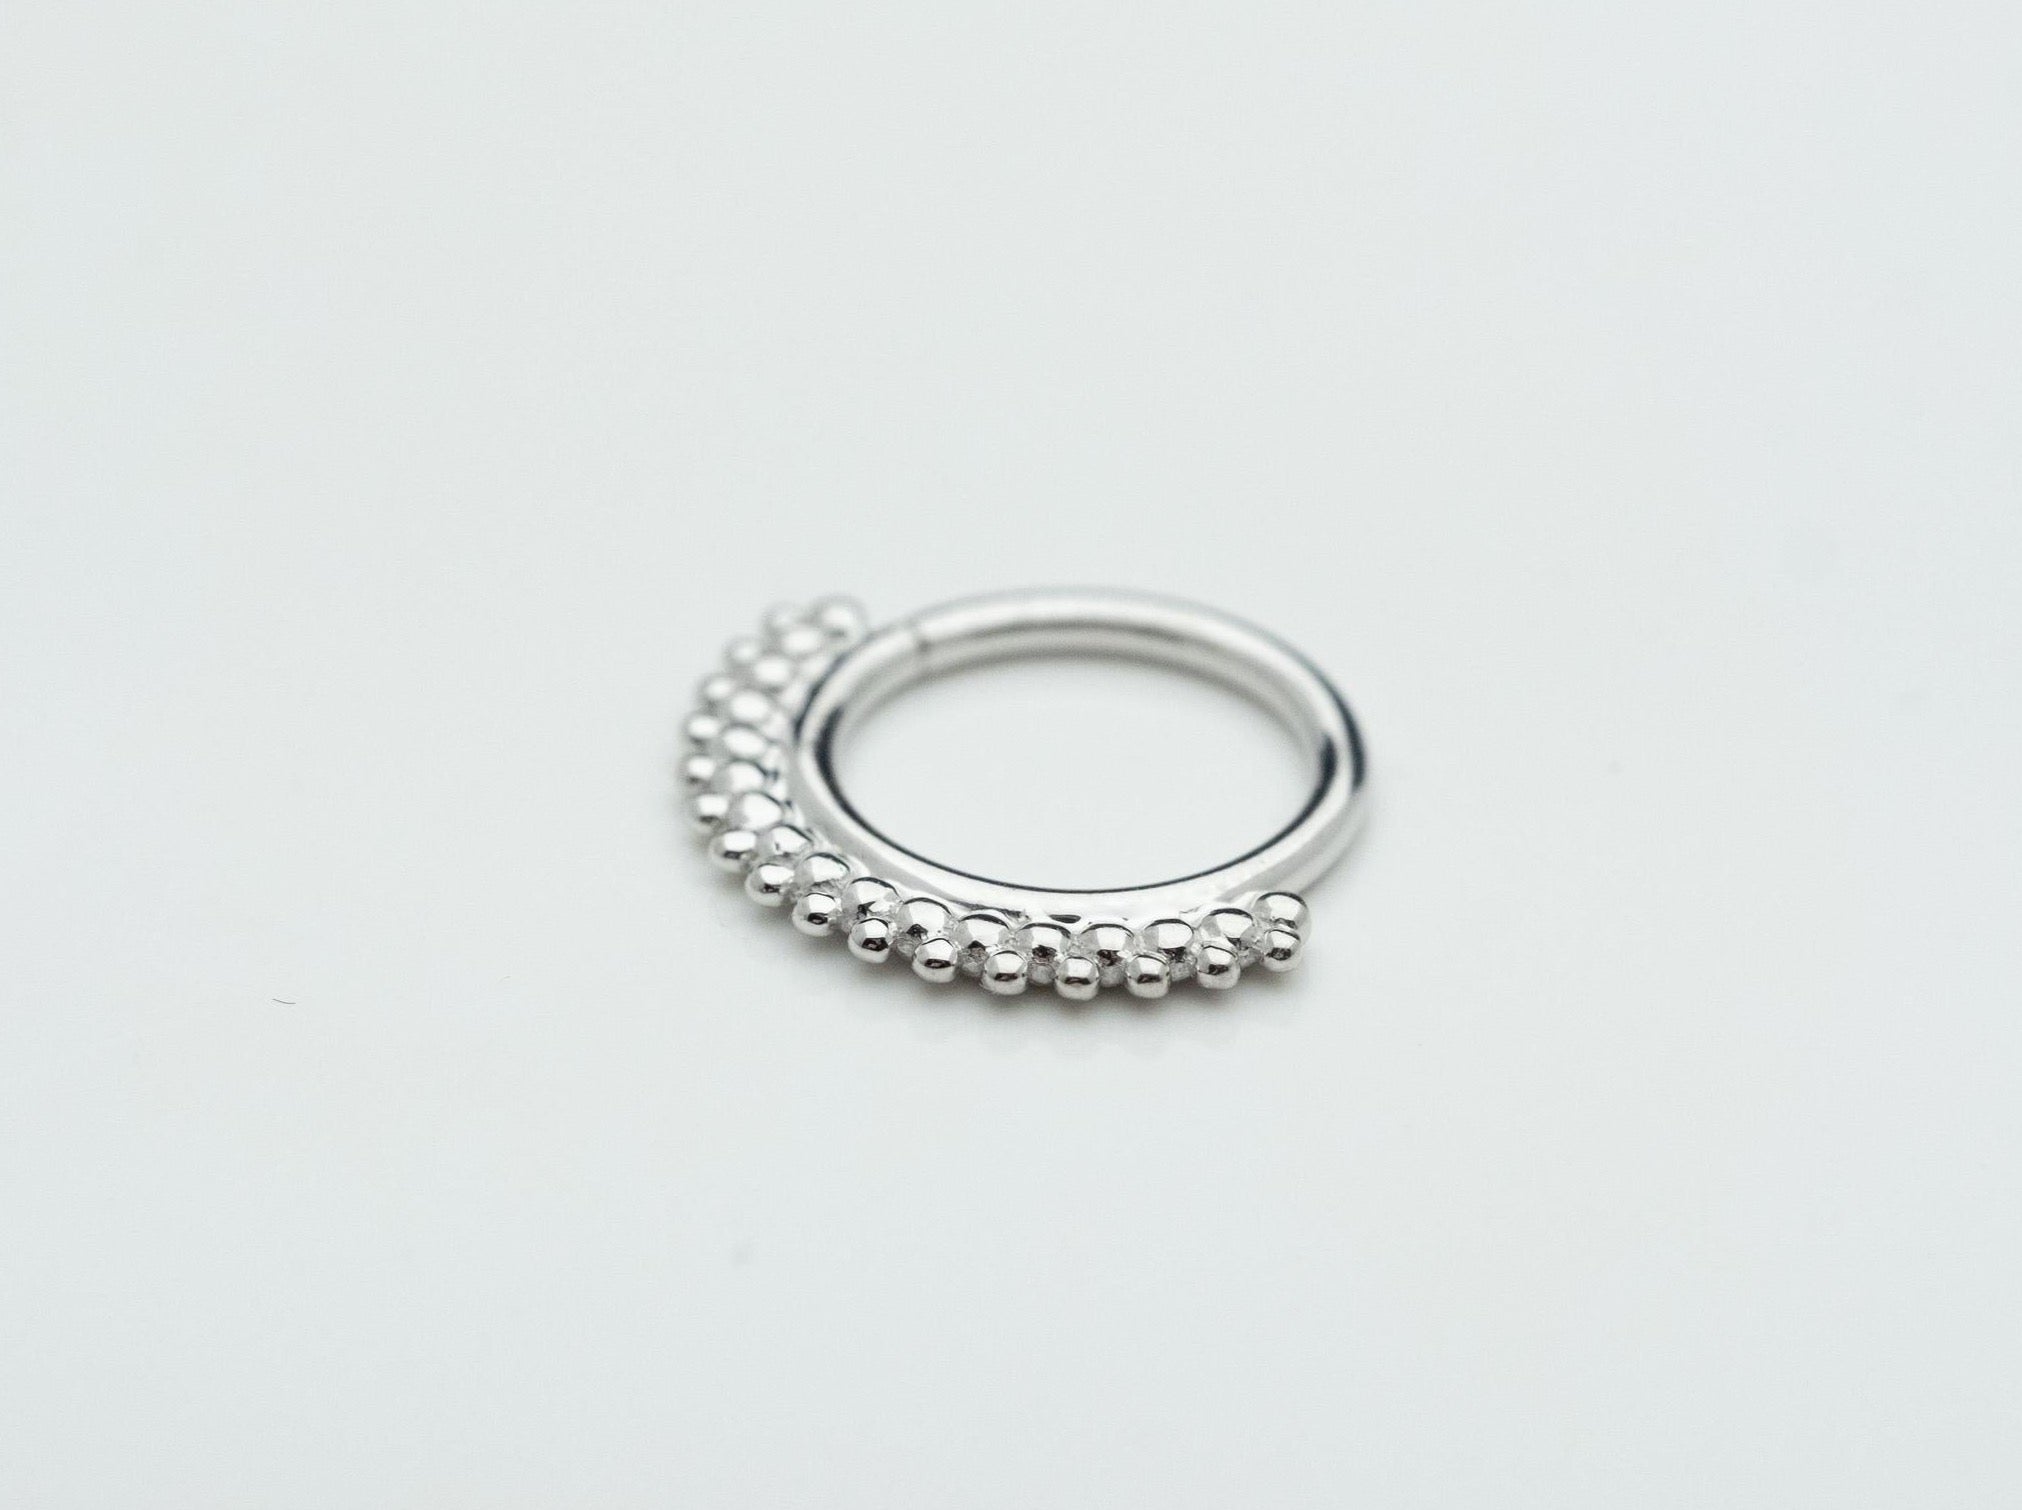 Kolo Seam Ring in 14k White Gold by BVLA